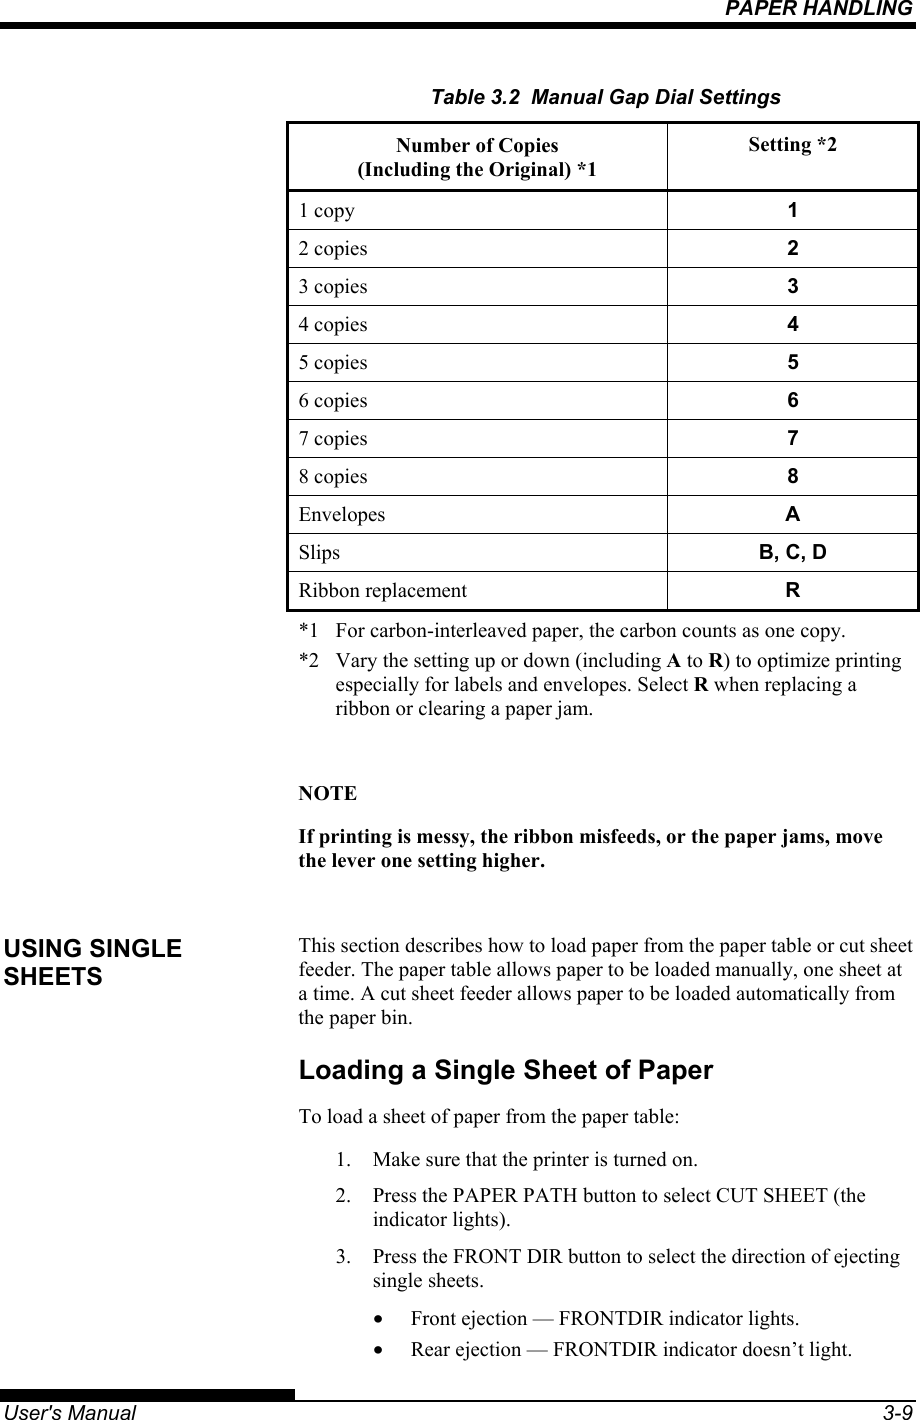 PAPER HANDLING   User&apos;s Manual  3-9 Table 3.2  Manual Gap Dial Settings Number of Copies  (Including the Original) *1 Setting *2 1 copy   1 2 copies   2 3 copies   3 4 copies   4 5 copies   5 6 copies   6 7 copies   7 8 copies   8 Envelopes  A Slips  B, C, D Ribbon replacement  R *1  For carbon-interleaved paper, the carbon counts as one copy. *2  Vary the setting up or down (including A to R) to optimize printing especially for labels and envelopes. Select R when replacing a ribbon or clearing a paper jam.  NOTE If printing is messy, the ribbon misfeeds, or the paper jams, move the lever one setting higher.  This section describes how to load paper from the paper table or cut sheet feeder. The paper table allows paper to be loaded manually, one sheet at a time. A cut sheet feeder allows paper to be loaded automatically from the paper bin. Loading a Single Sheet of Paper To load a sheet of paper from the paper table: 1.  Make sure that the printer is turned on. 2.  Press the PAPER PATH button to select CUT SHEET (the indicator lights). 3.  Press the FRONT DIR button to select the direction of ejecting single sheets. •  Front ejection — FRONTDIR indicator lights. •  Rear ejection — FRONTDIR indicator doesn’t light. USING SINGLE SHEETS 